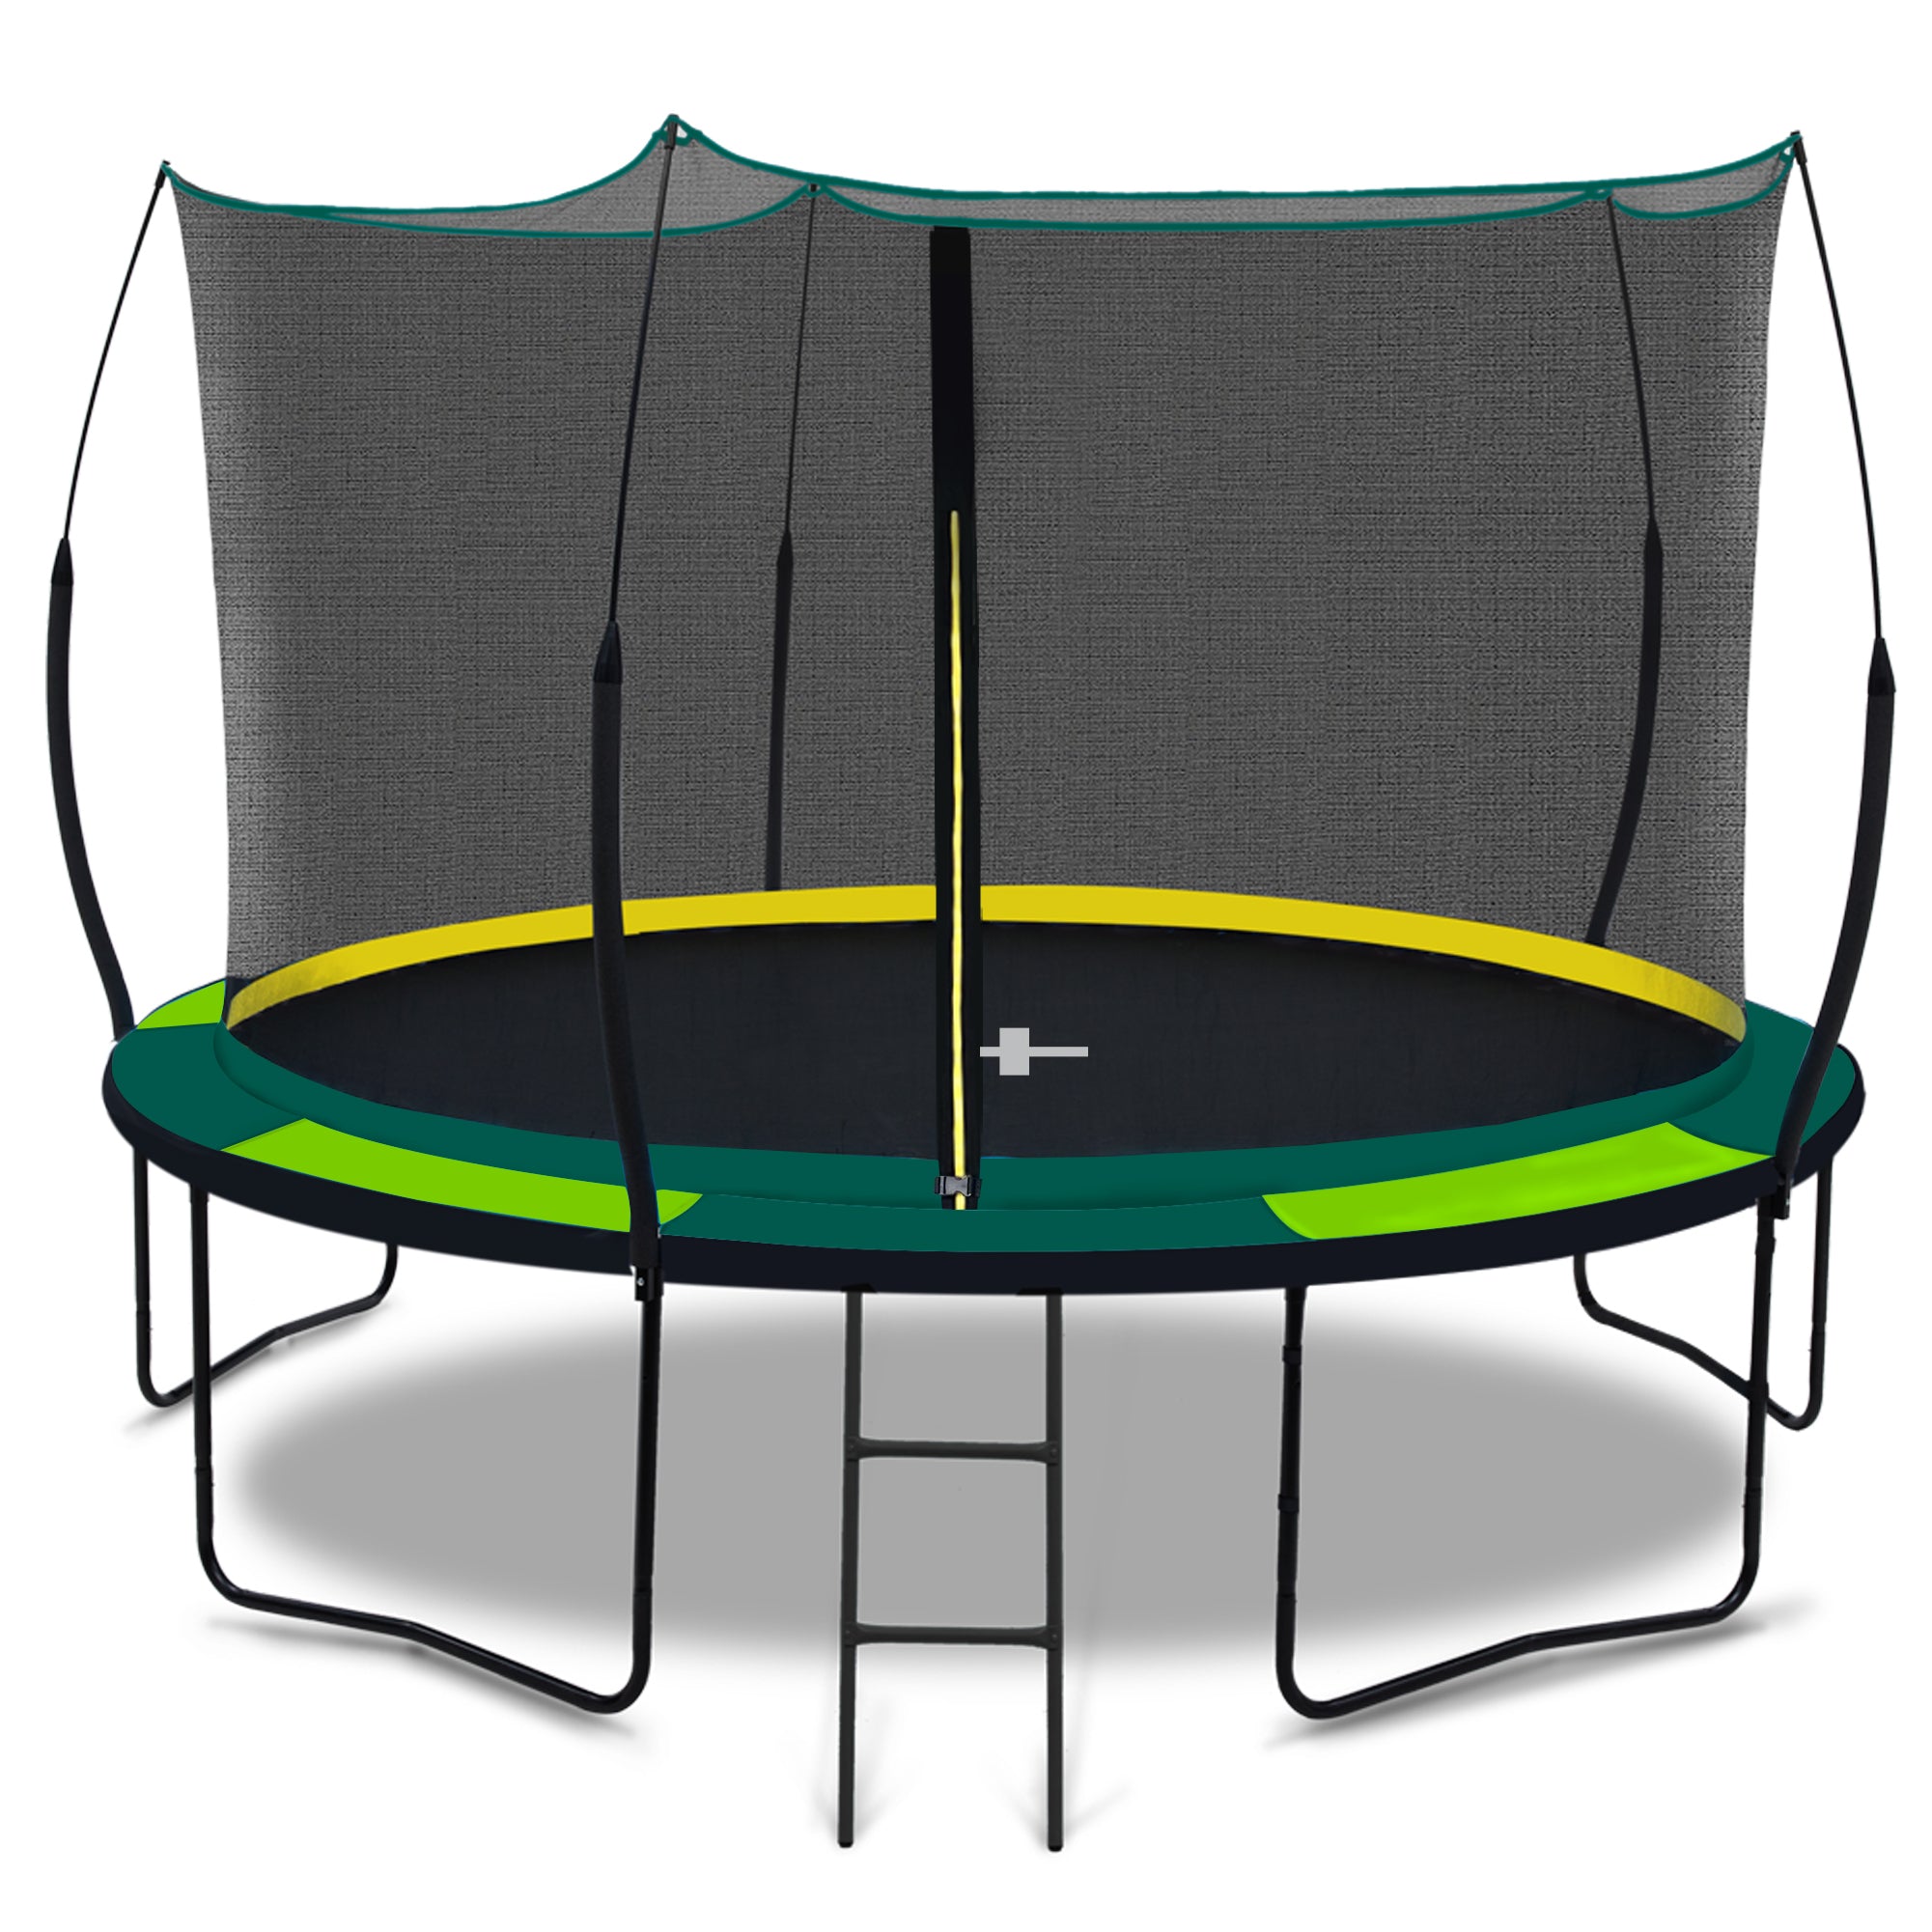 YC 12FT Recreational Trampolines with Enclosure for green-steel